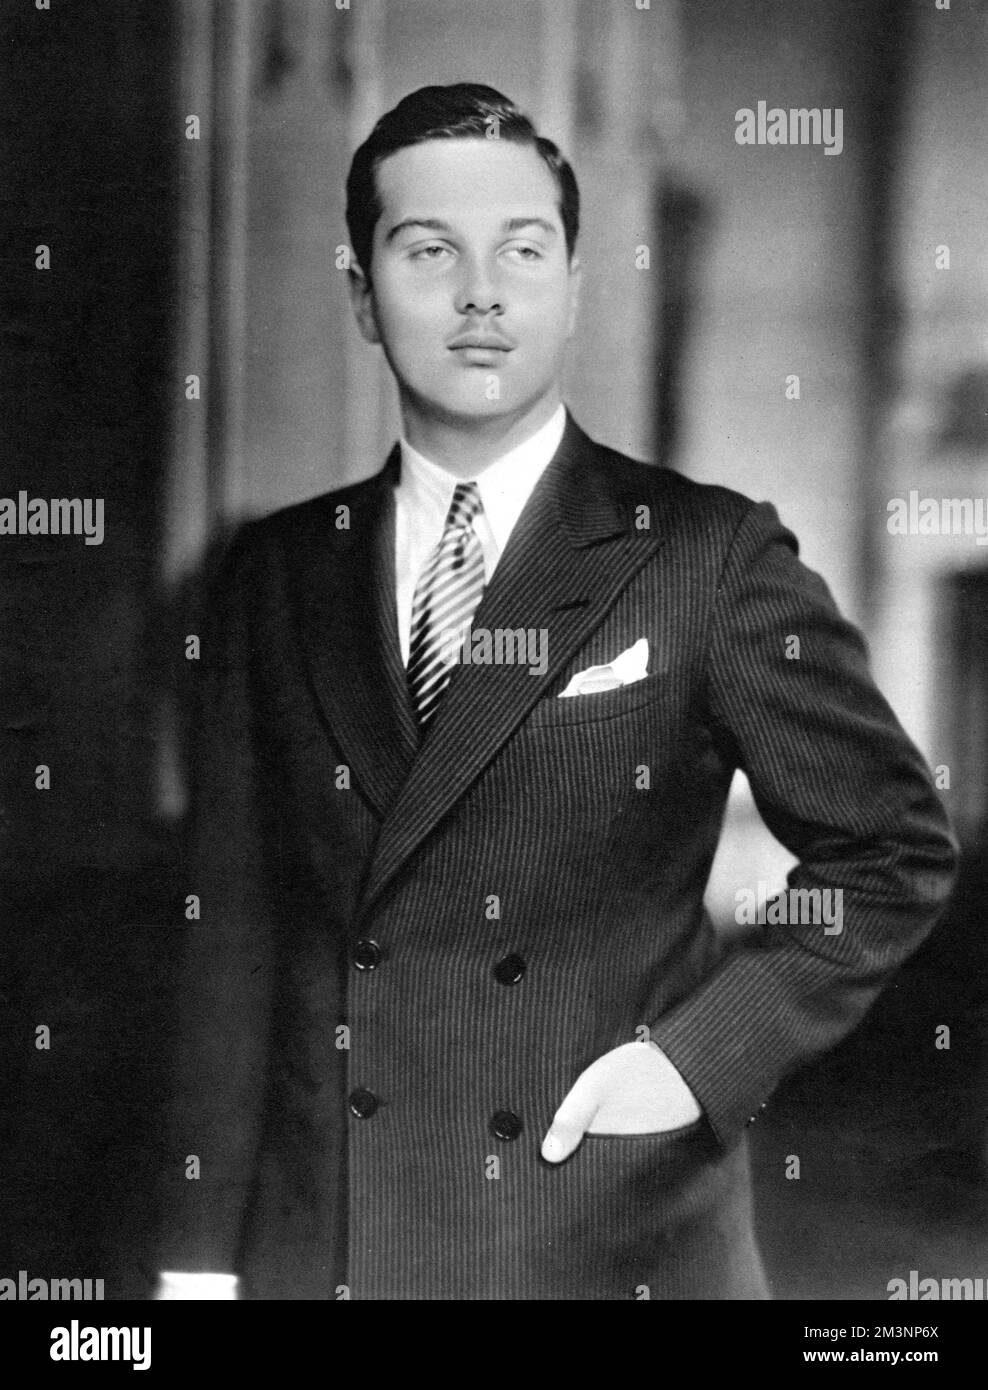 Farouk I of Egypt (1920 - 1965), aged 16. Farouk was the tenth ruler from the Muhammad Ali Dynasty and the penultimate King of Egypt and Sudan, succeeding his father, Fuad I, in 1936.  1936 Stock Photo